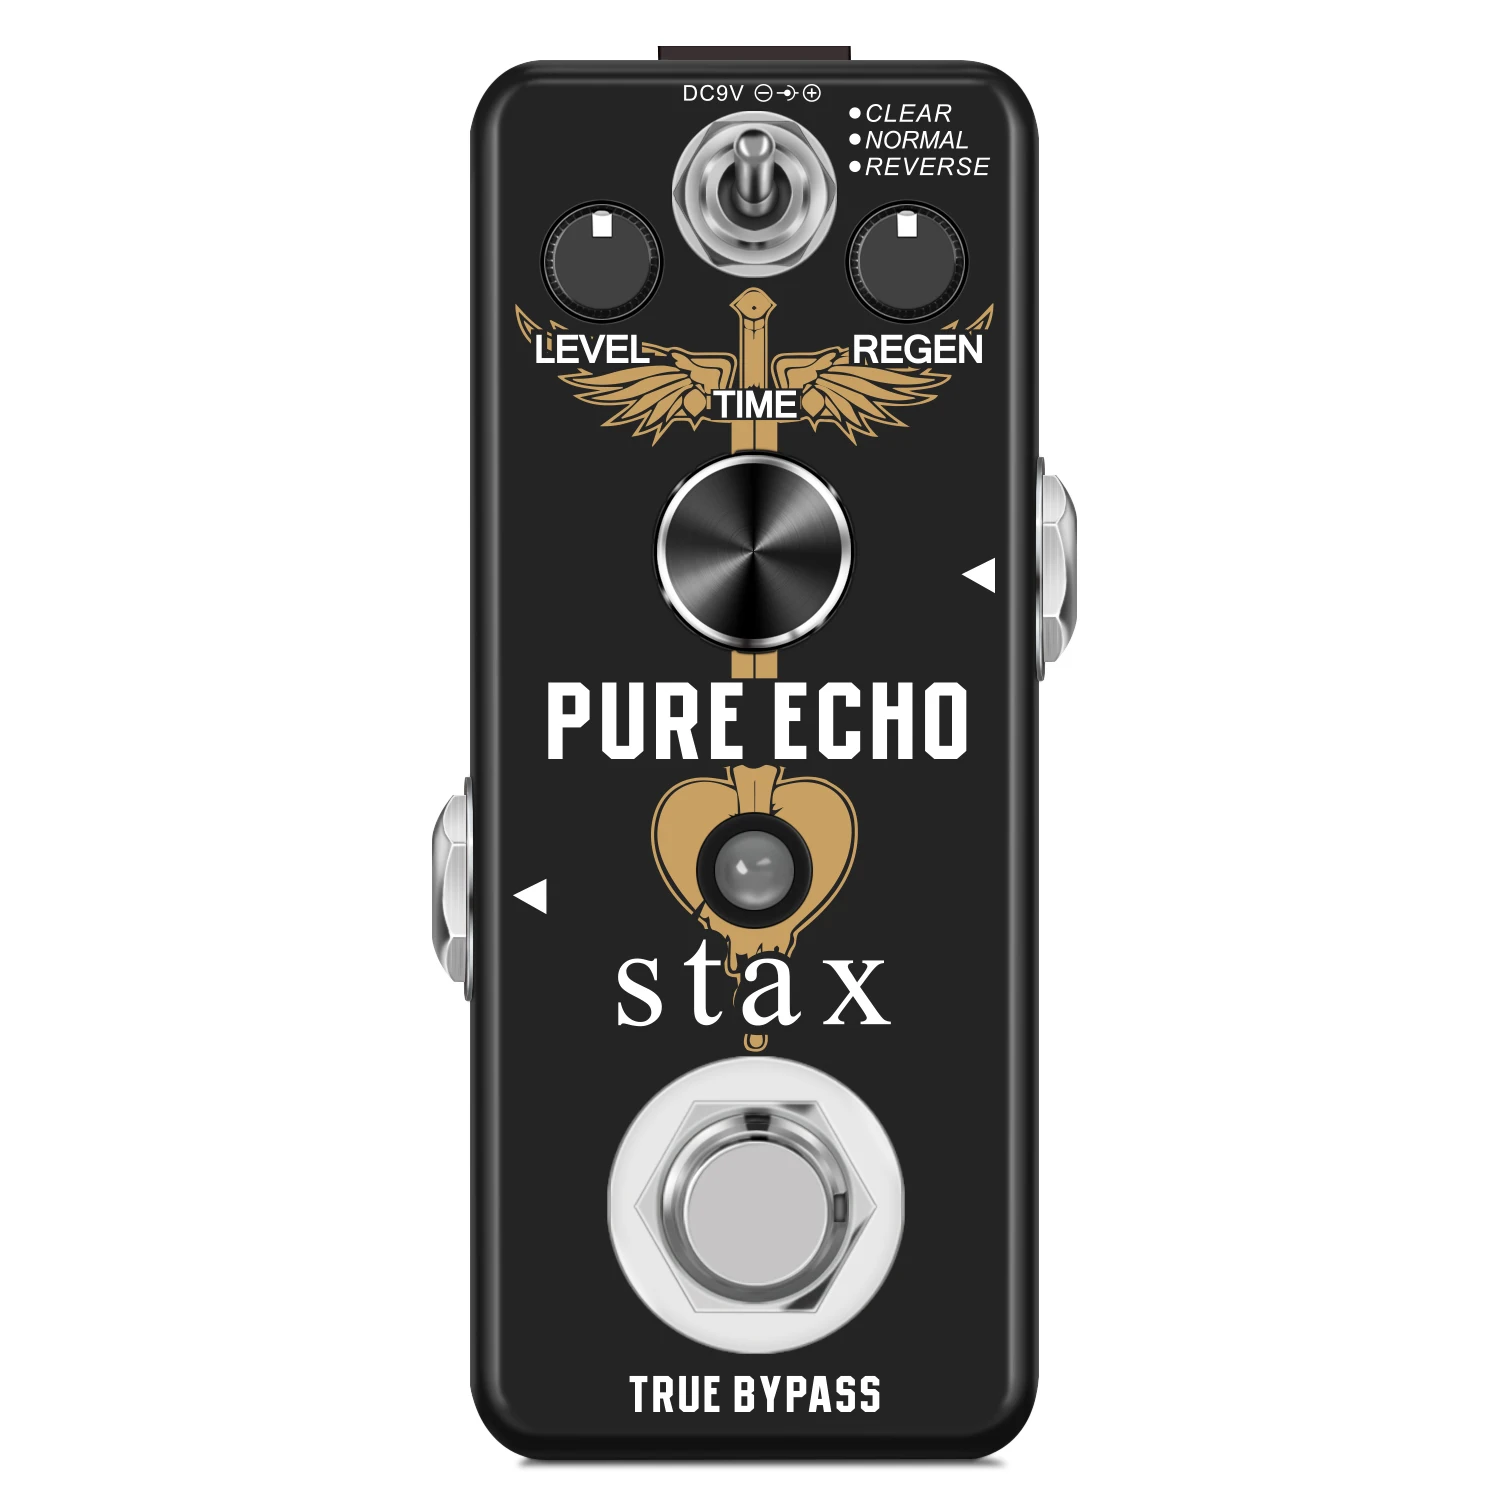 Stax Digital Delay Echo Effect Pedal for Guitar Bass with 3 Modes True Bypass LEF-3803 enlarge